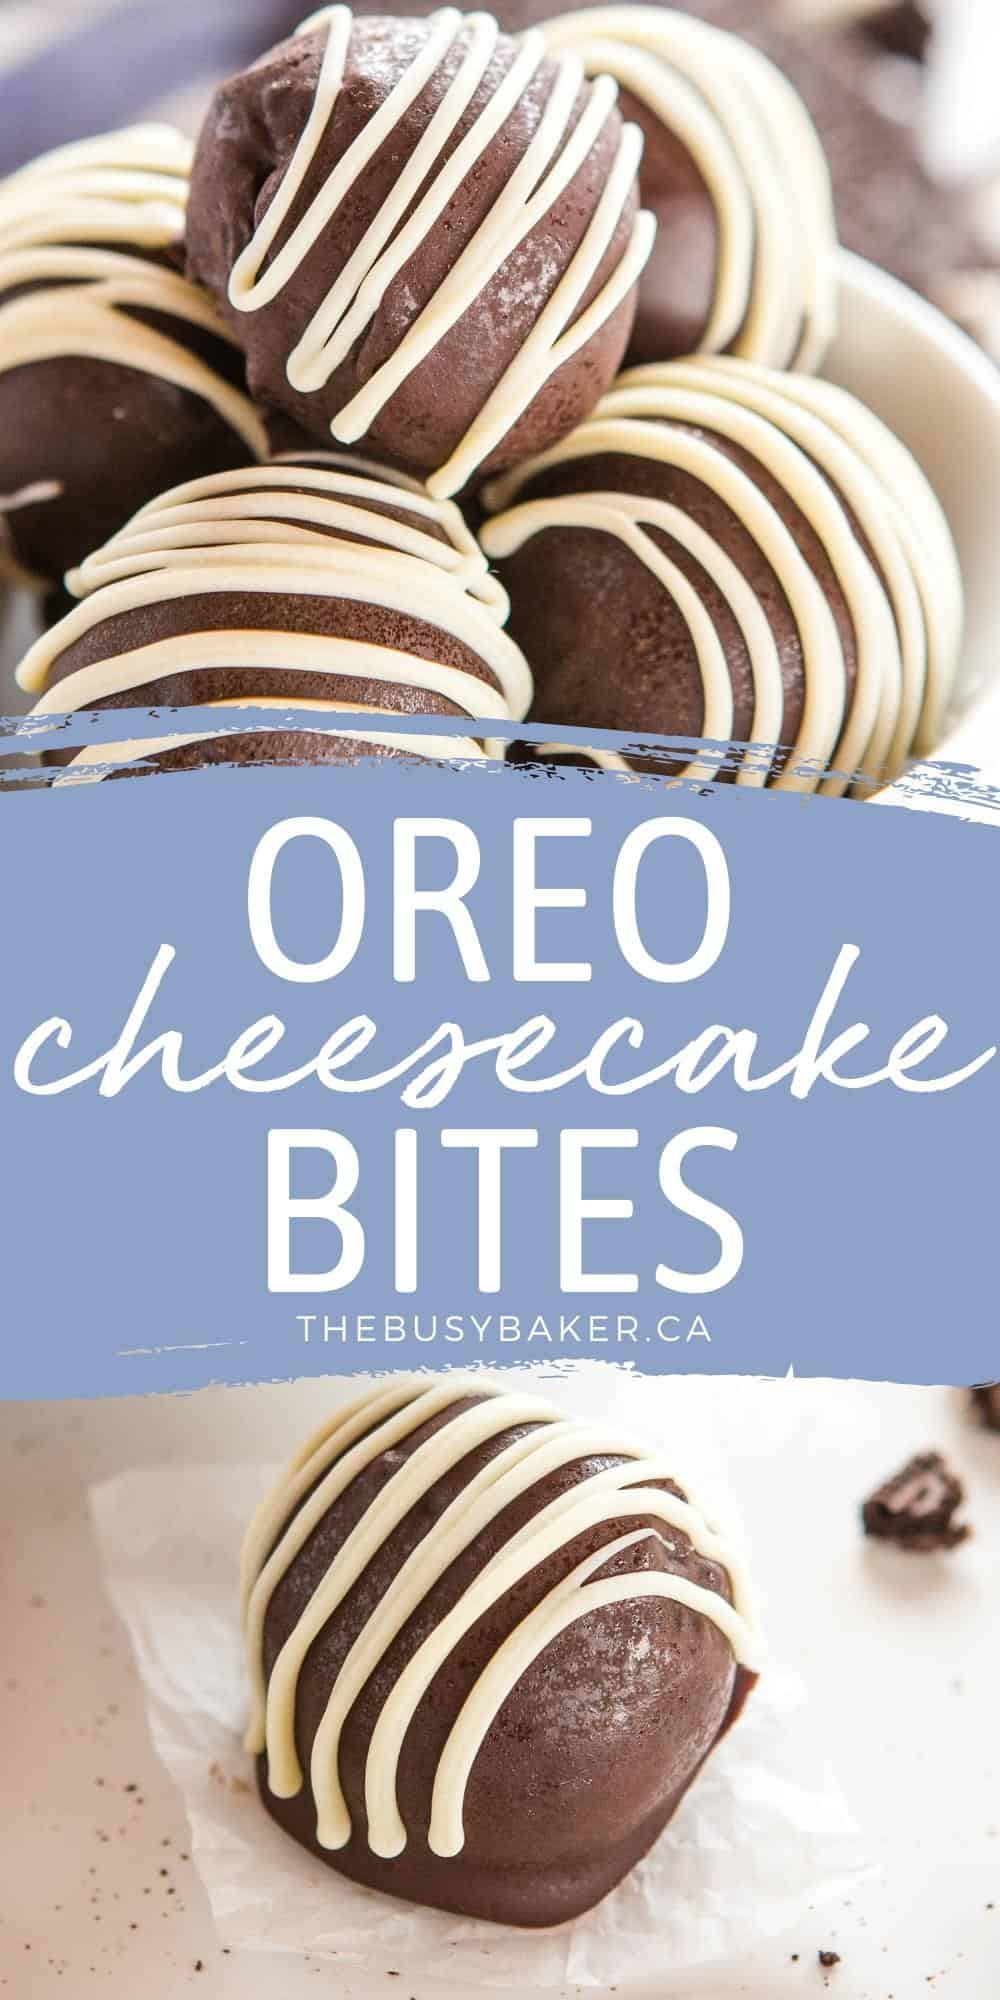 These Oreo Cheesecake Bites are so easy to make with only 5 ingredients! They're the perfect no-bake sweet treat! Recipe from thebusybaker.ca! #cheesecakebites #cakepops #holidaytreat #holidaybaking #nobake #oreocheesecakebites #oreo via @busybakerblog